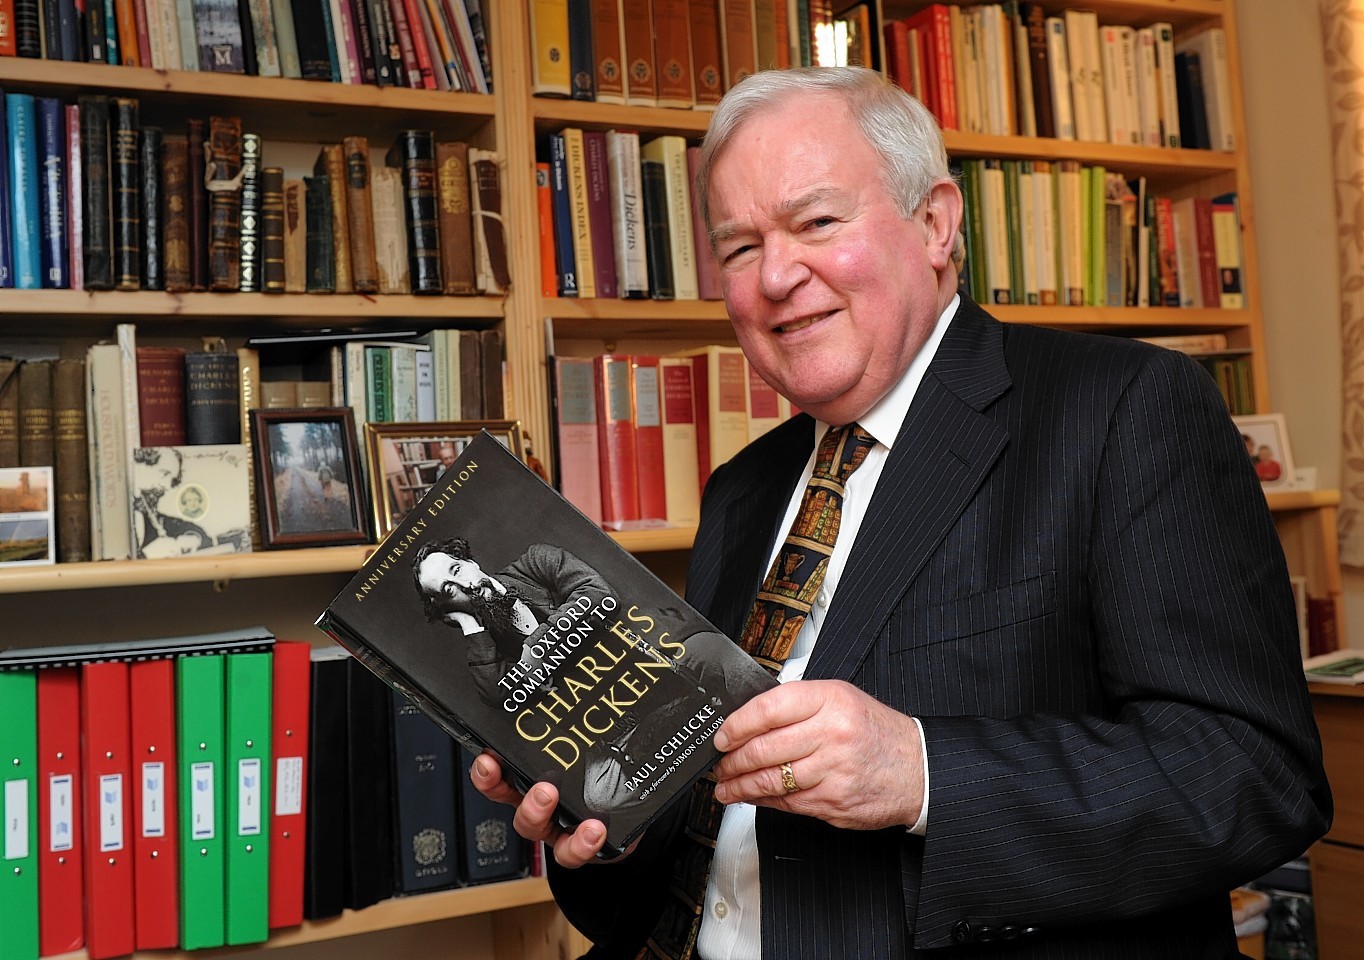 Dr Paul Schlicke is one of the world's leading scholars in Dickensian studies.